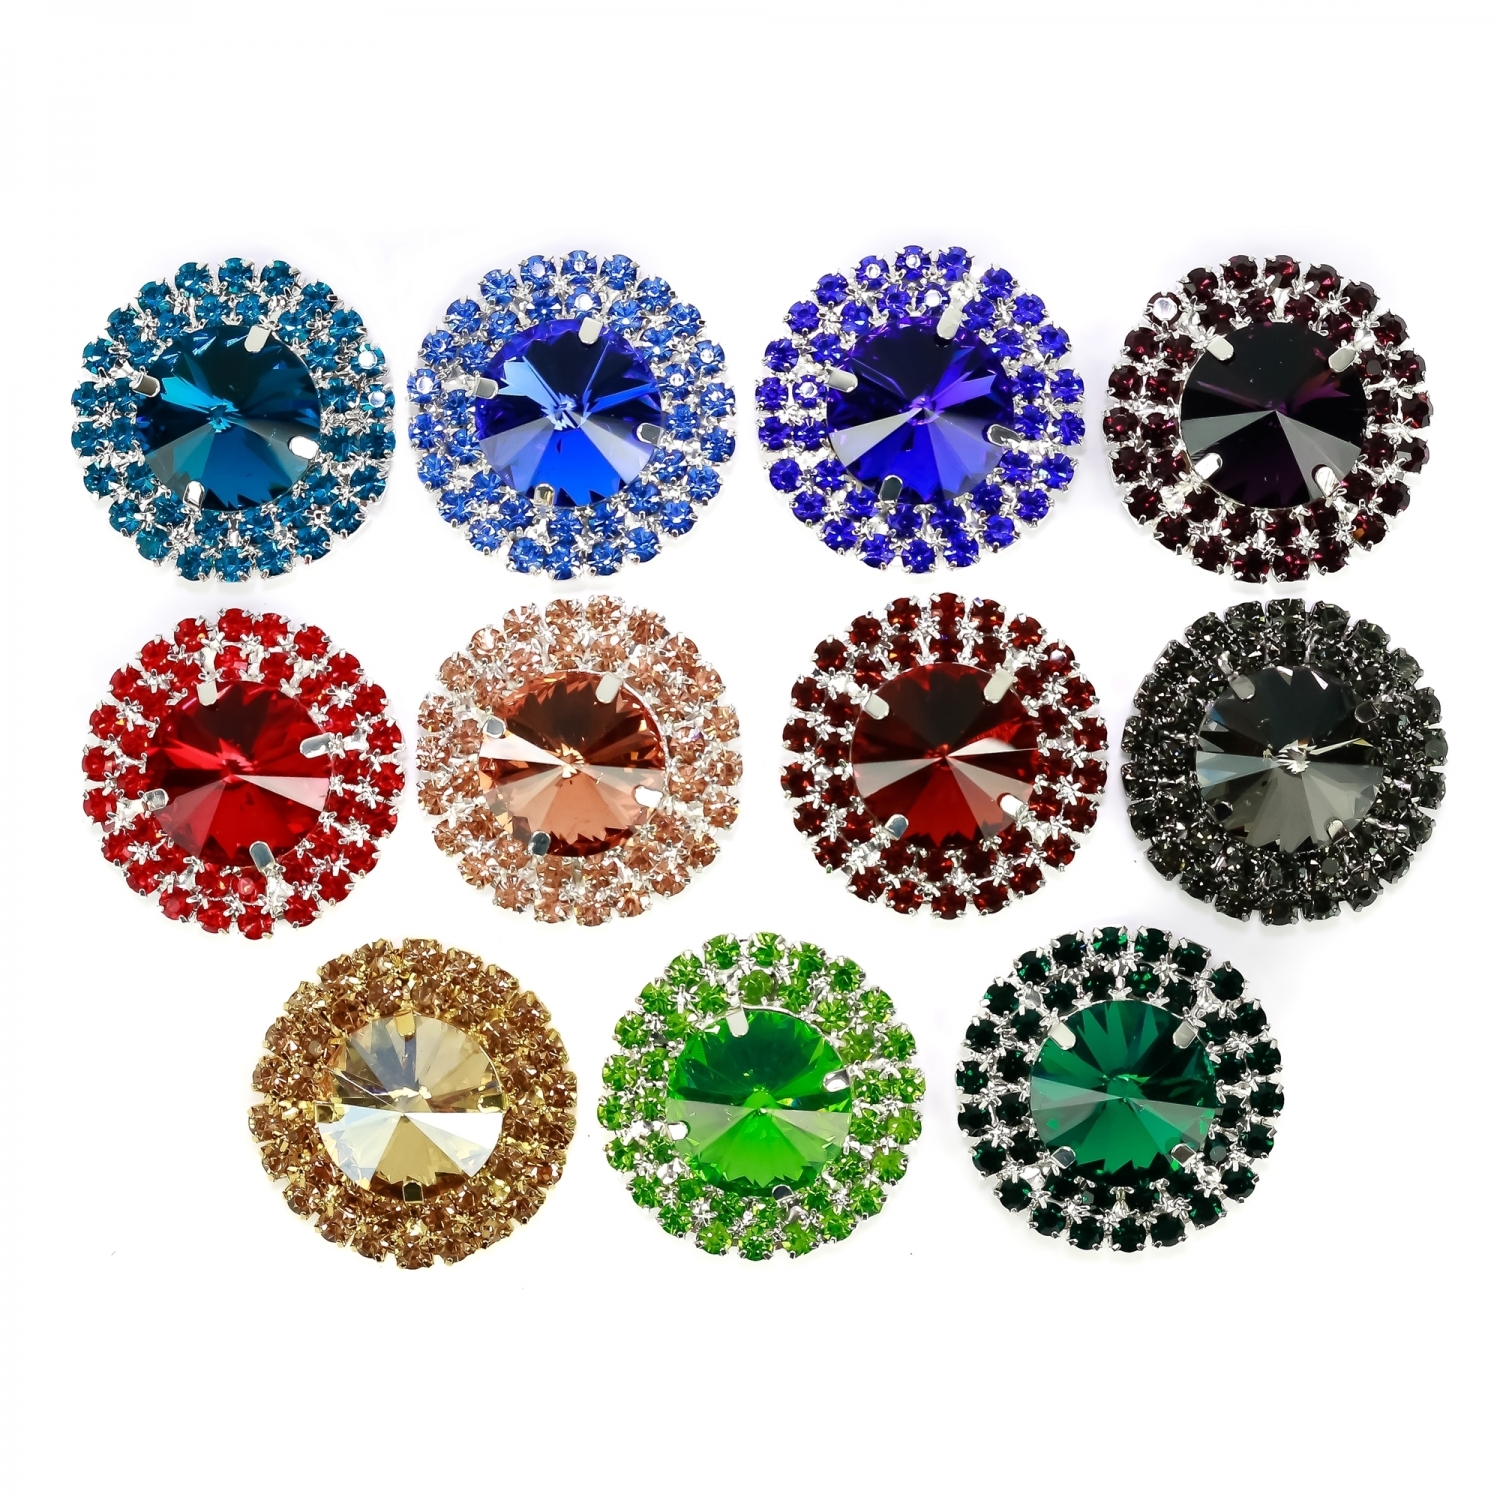 Applications with Glass Rhinestoness, 3.1 cm (2 pcs/pack) Code: BW-422